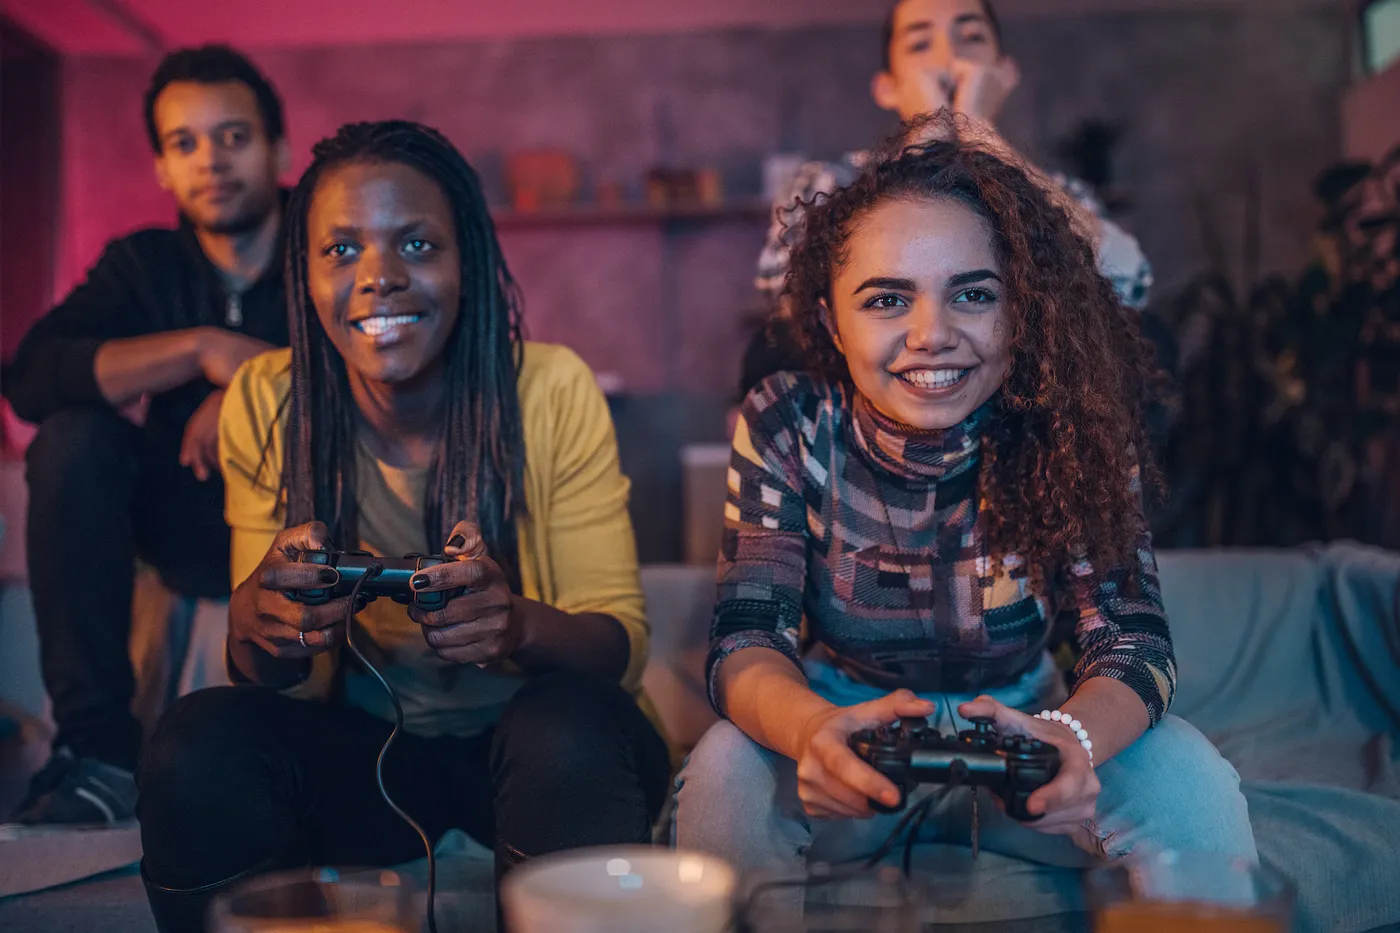 Young people playing video games